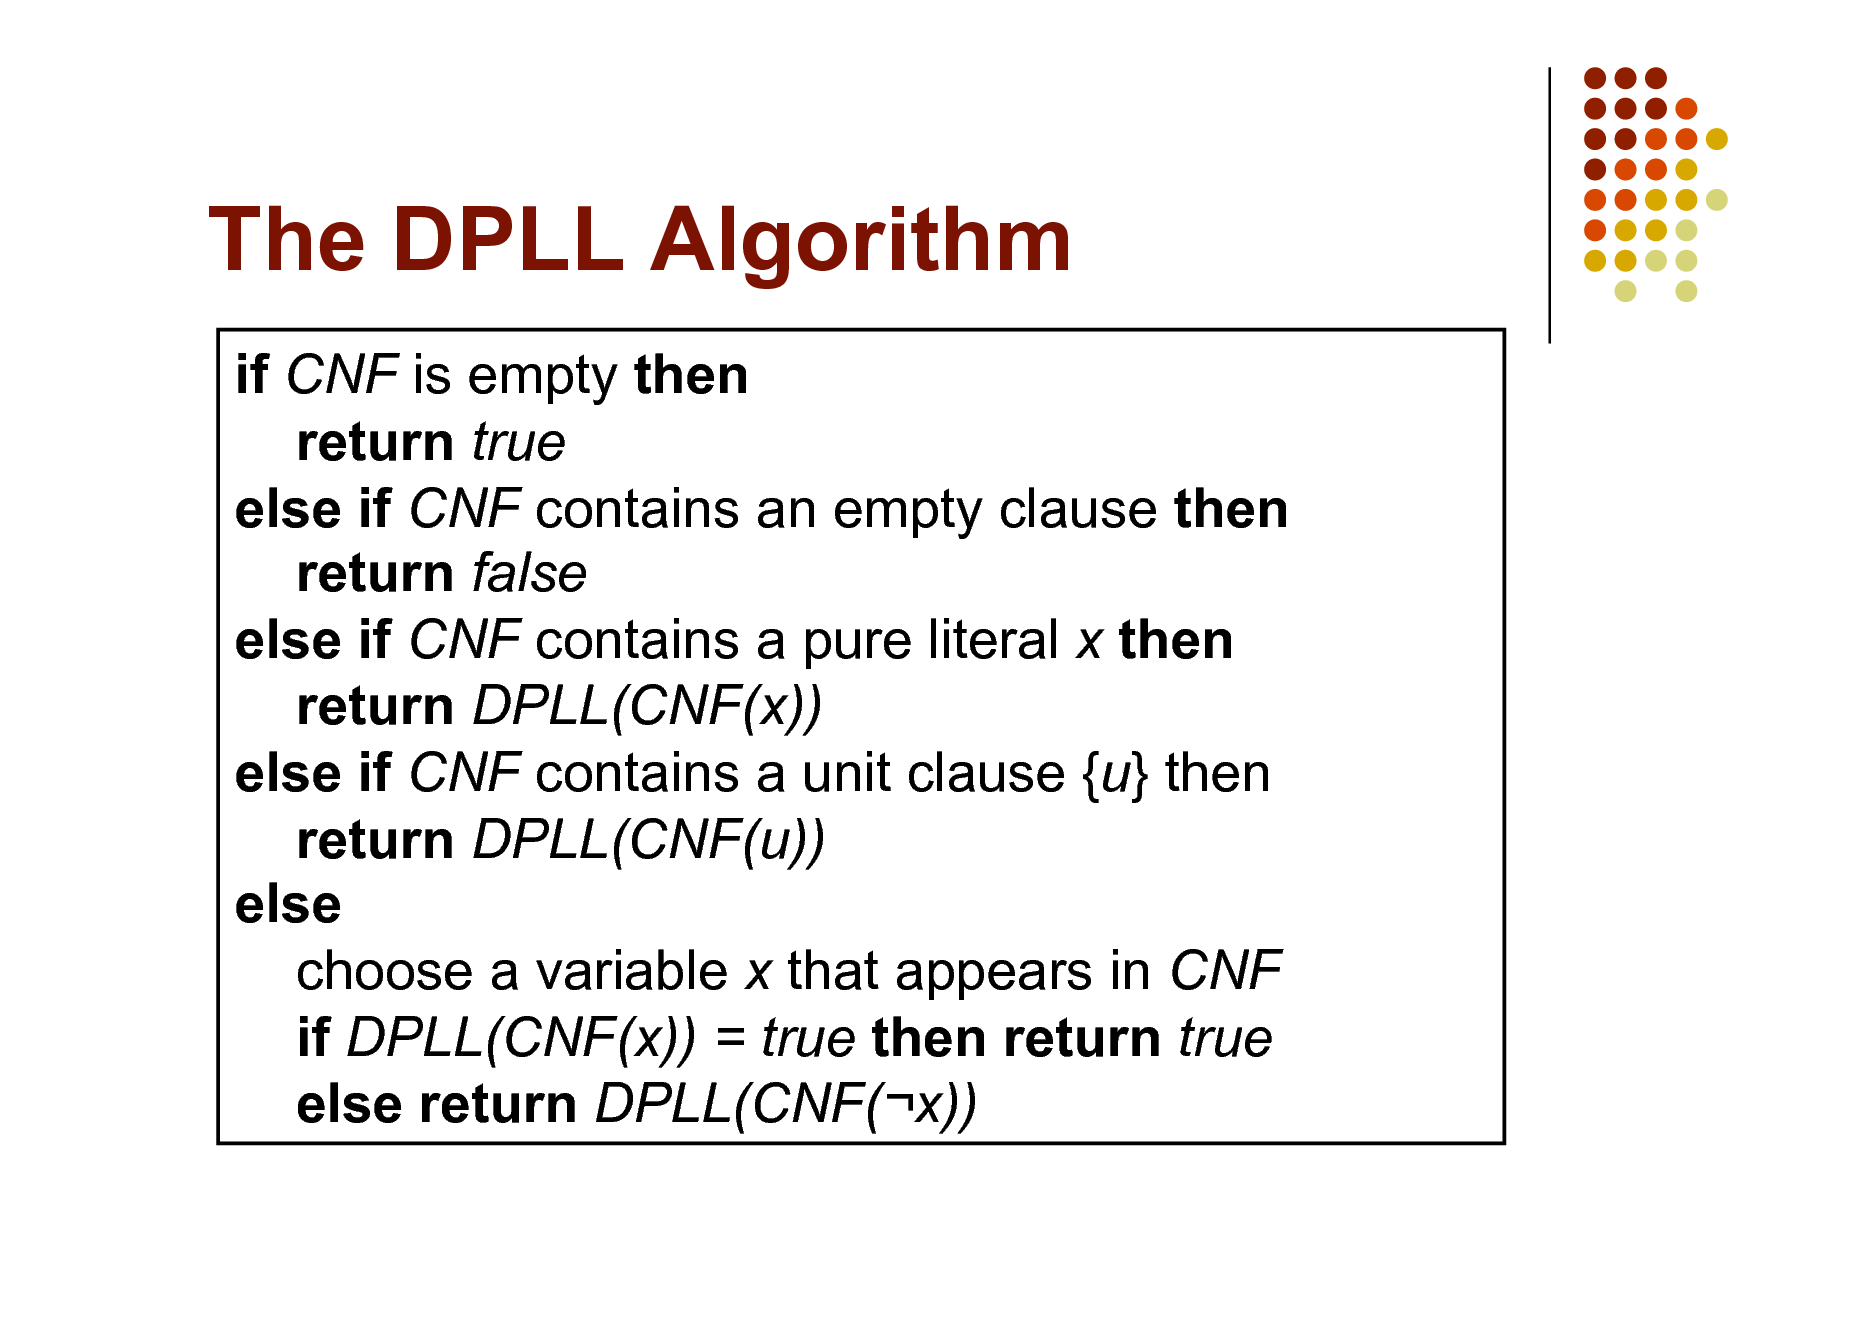 Slide: The DPLL Algorithm
if CNF is empty then return true else if CNF contains an empty clause then return false else if CNF contains a pure literal x then return DPLL(CNF(x)) else if CNF contains a unit clause {u} then return DPLL(CNF(u)) else choose a variable x that appears in CNF if DPLL(CNF(x)) = true then return true else return DPLL(CNF(x))

